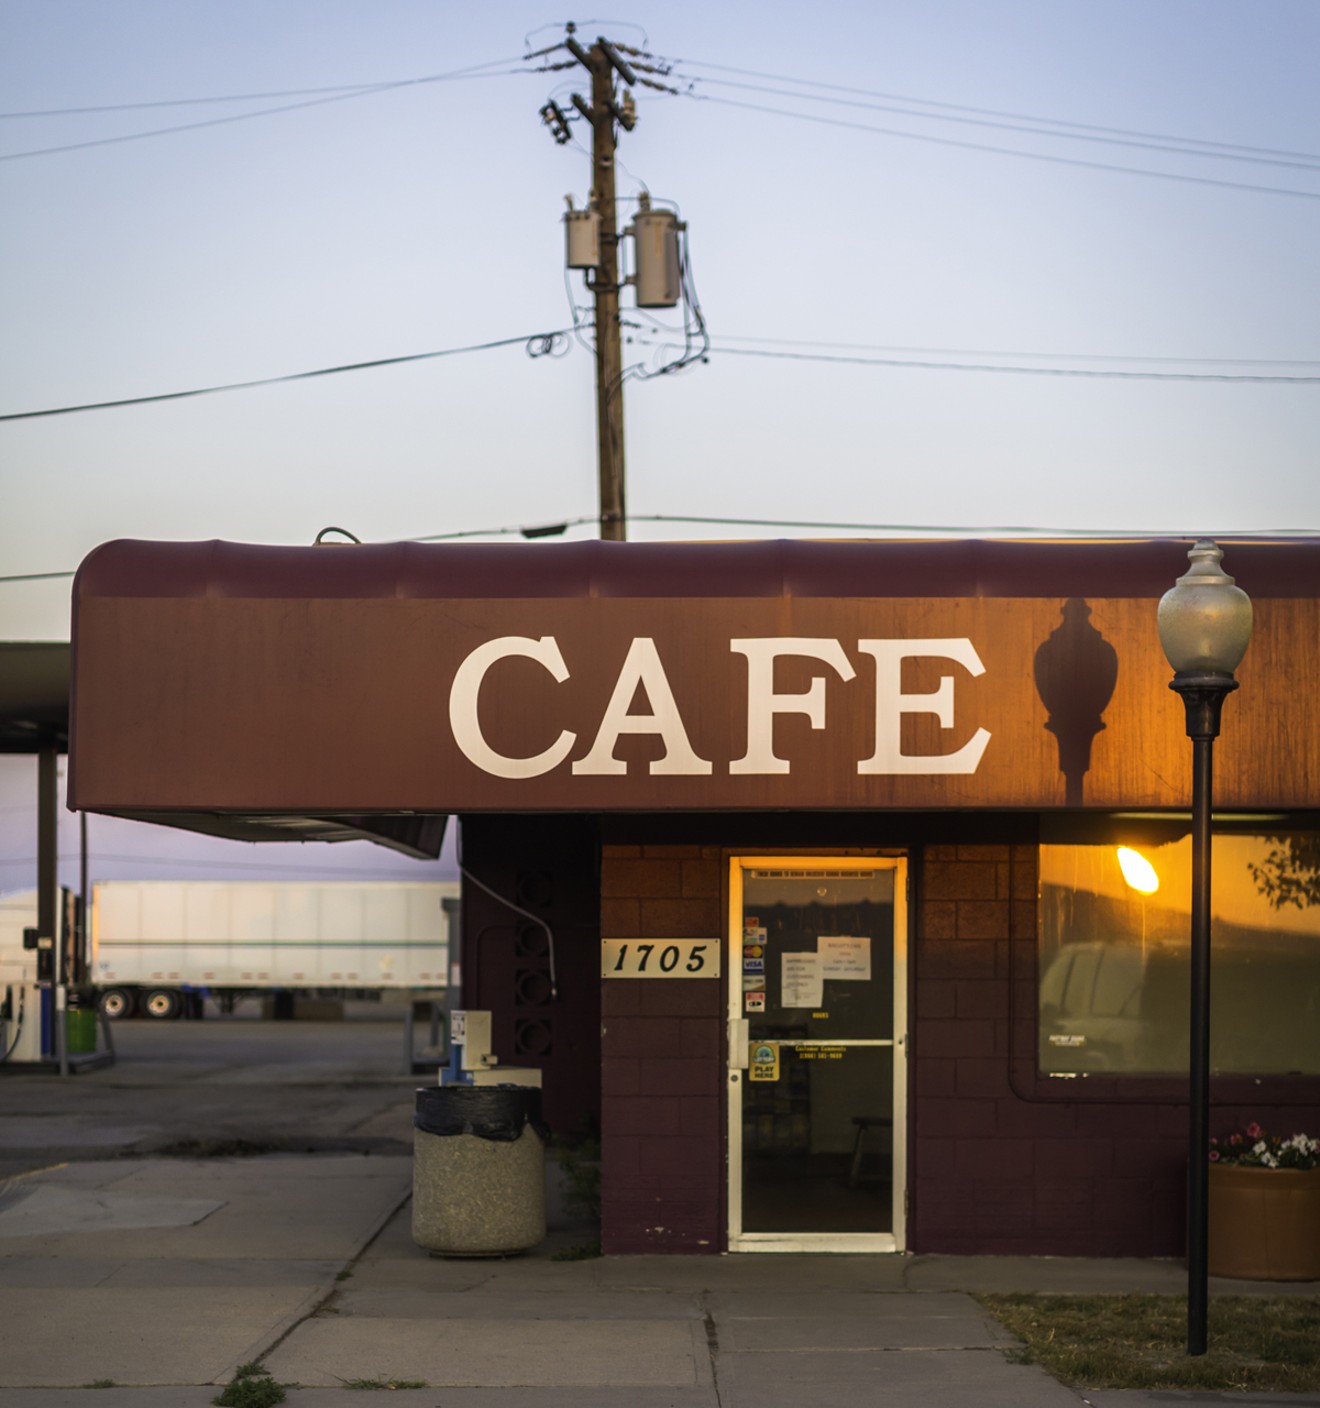 Biscuits Cafe is one of only a handful of restaurants in Watkins, and some people would like to keep it that way.